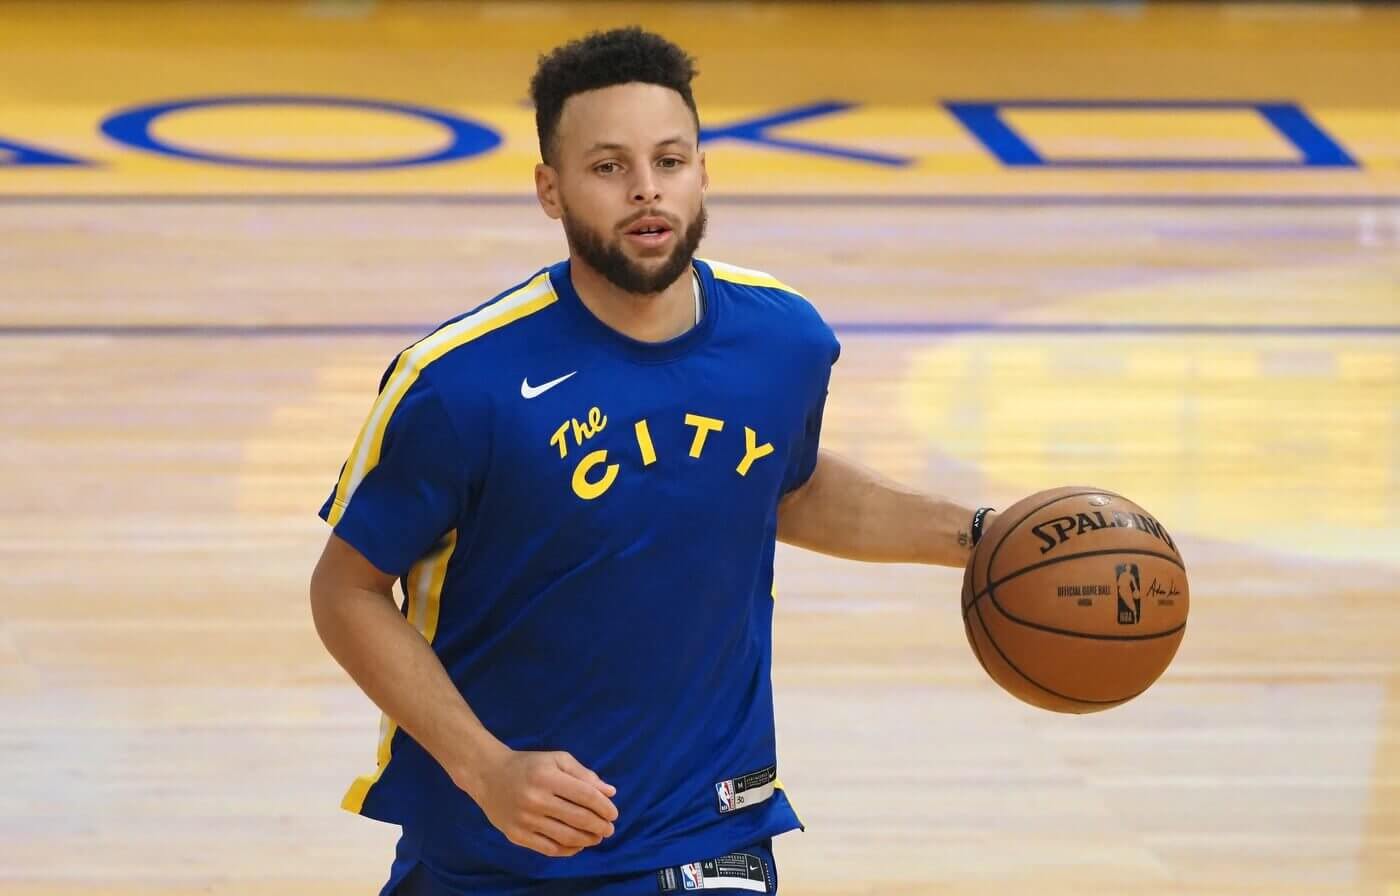 Mar 14, 2021; San Francisco, California, USA; Golden State Warriors guard Stephen Curry (30) warms up before the game against the Utah Jazz at Chase Center. Mandatory Credit: Kelley L Cox-USA TODAY Sports